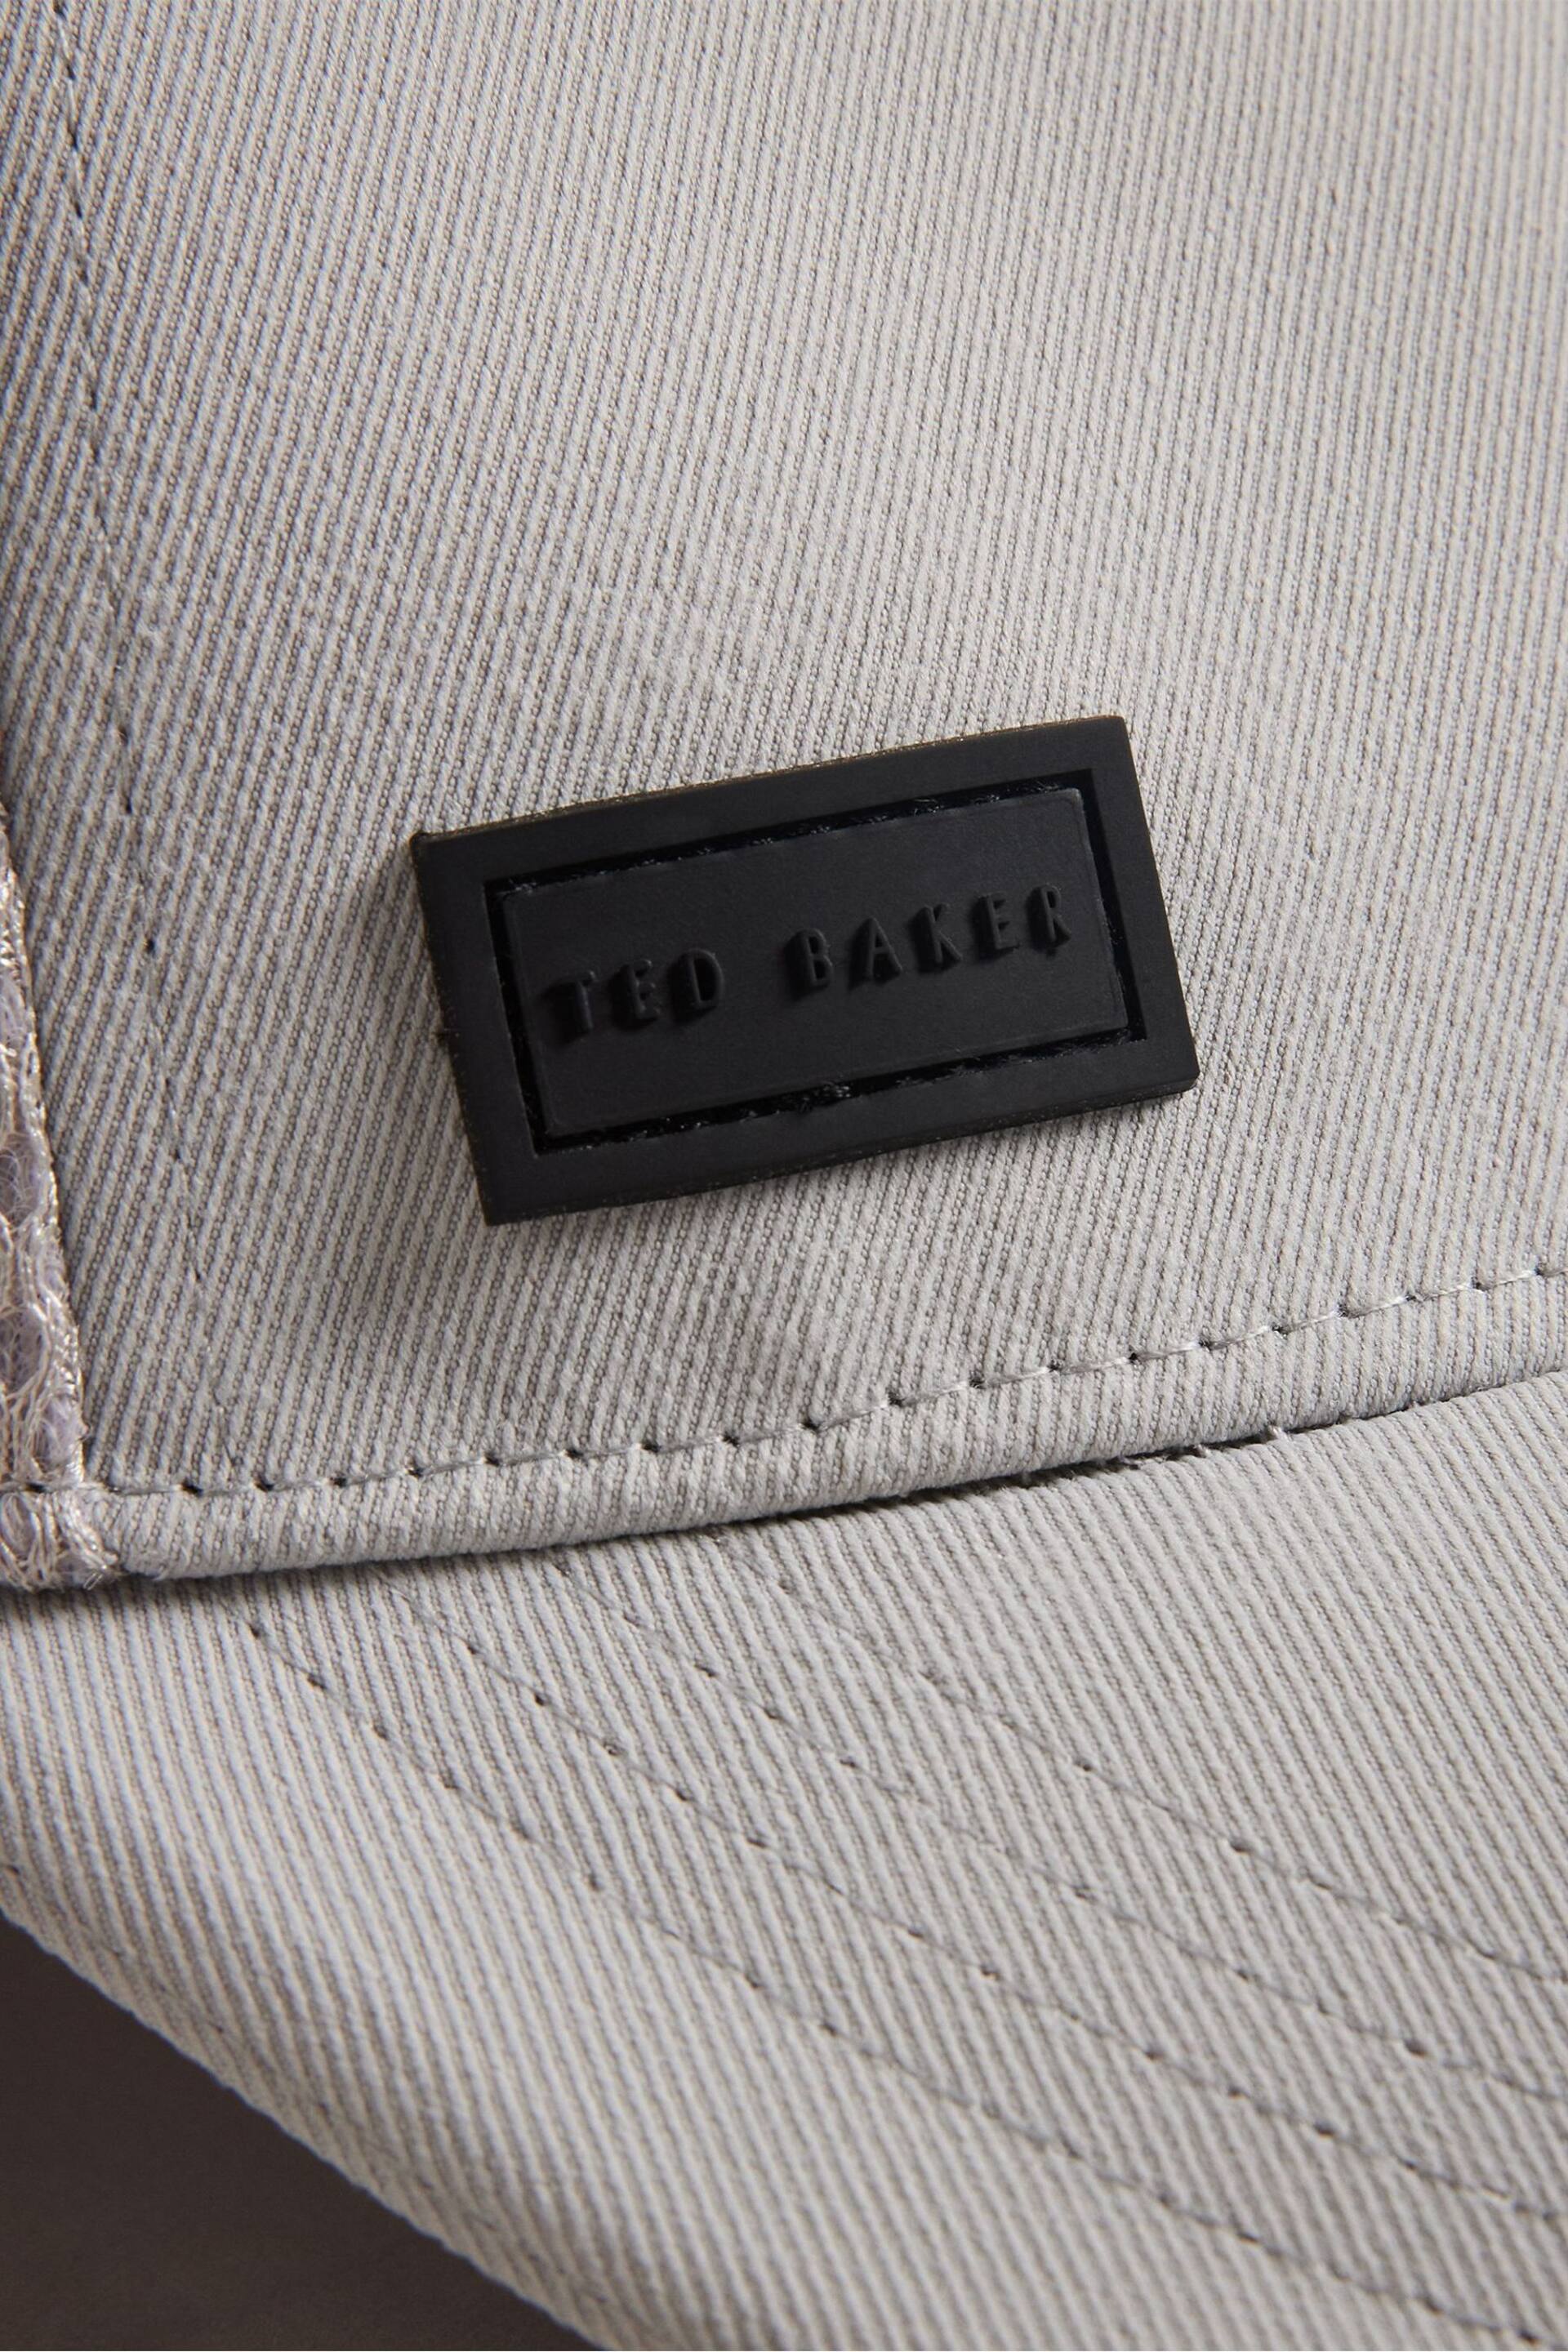 Ted Baker Grey Ethanns Mesh And Cotton T Cap - Image 3 of 4